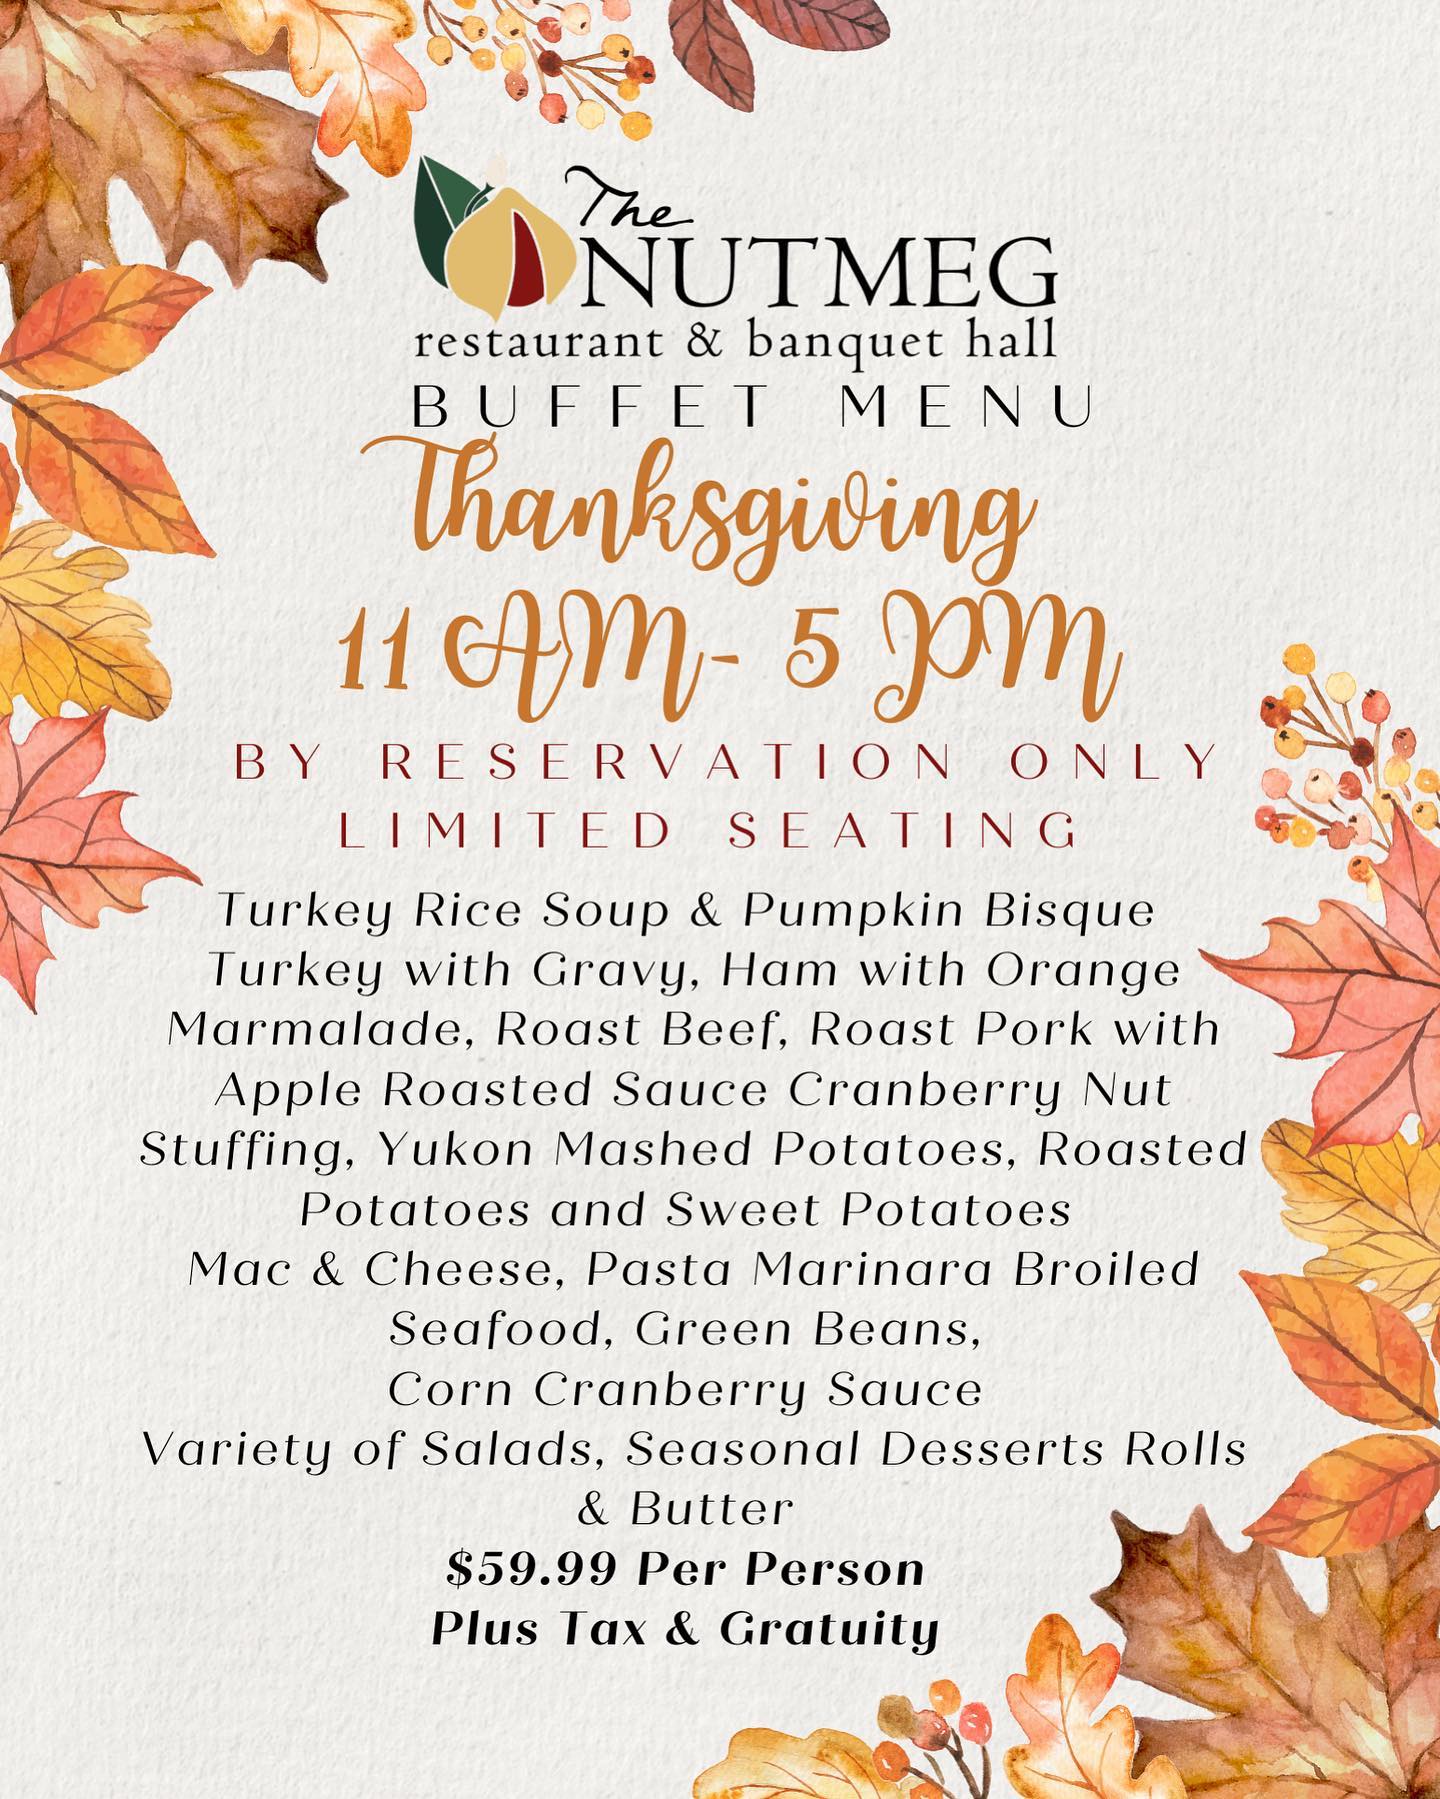 Thanksgiving at Nutmeg (Or Take Home with You) @ The Nutmeg Restaurant and Banquet Facility